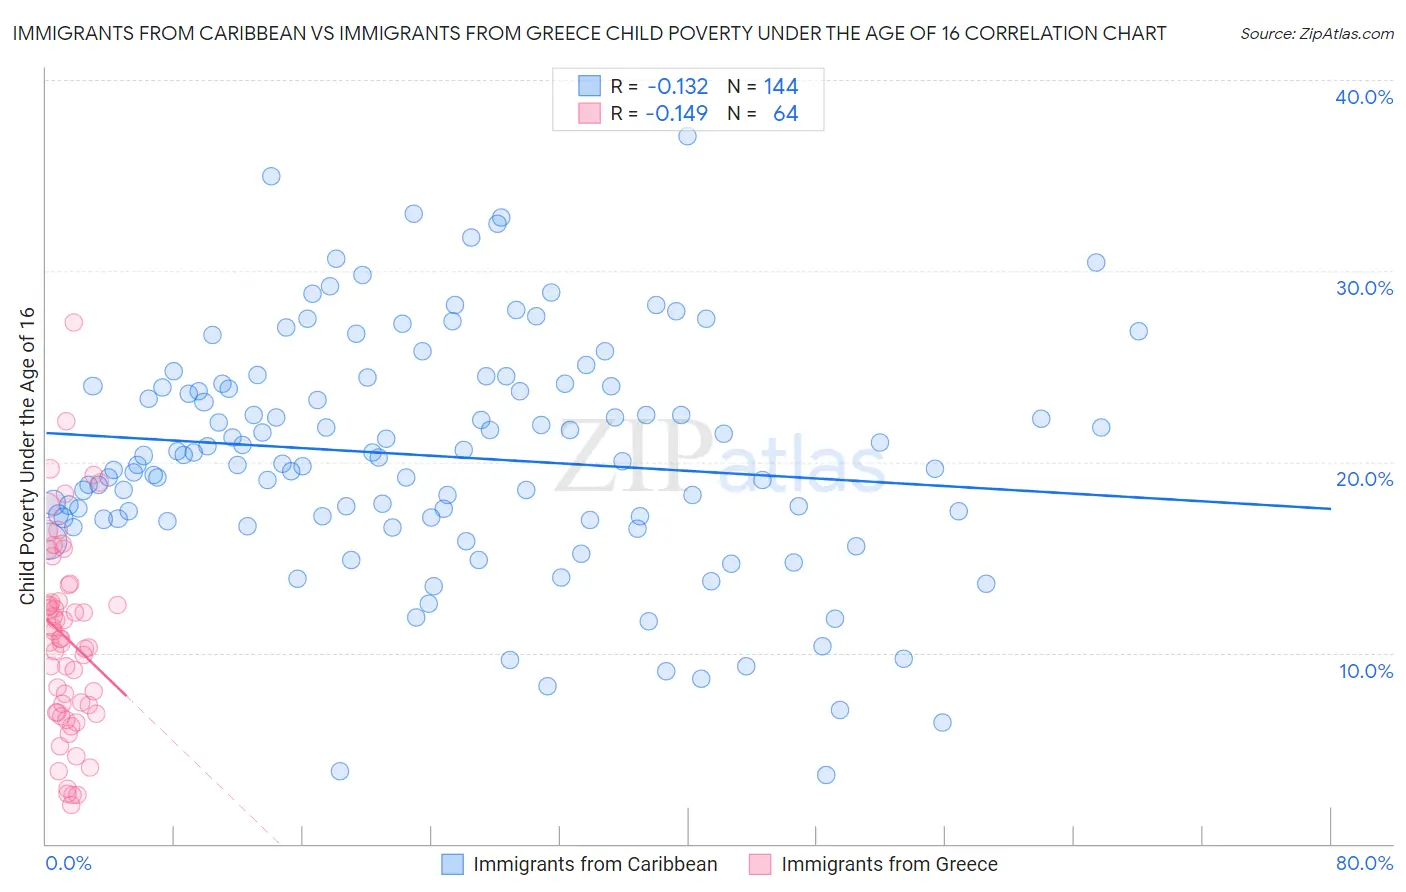 Immigrants from Caribbean vs Immigrants from Greece Child Poverty Under the Age of 16